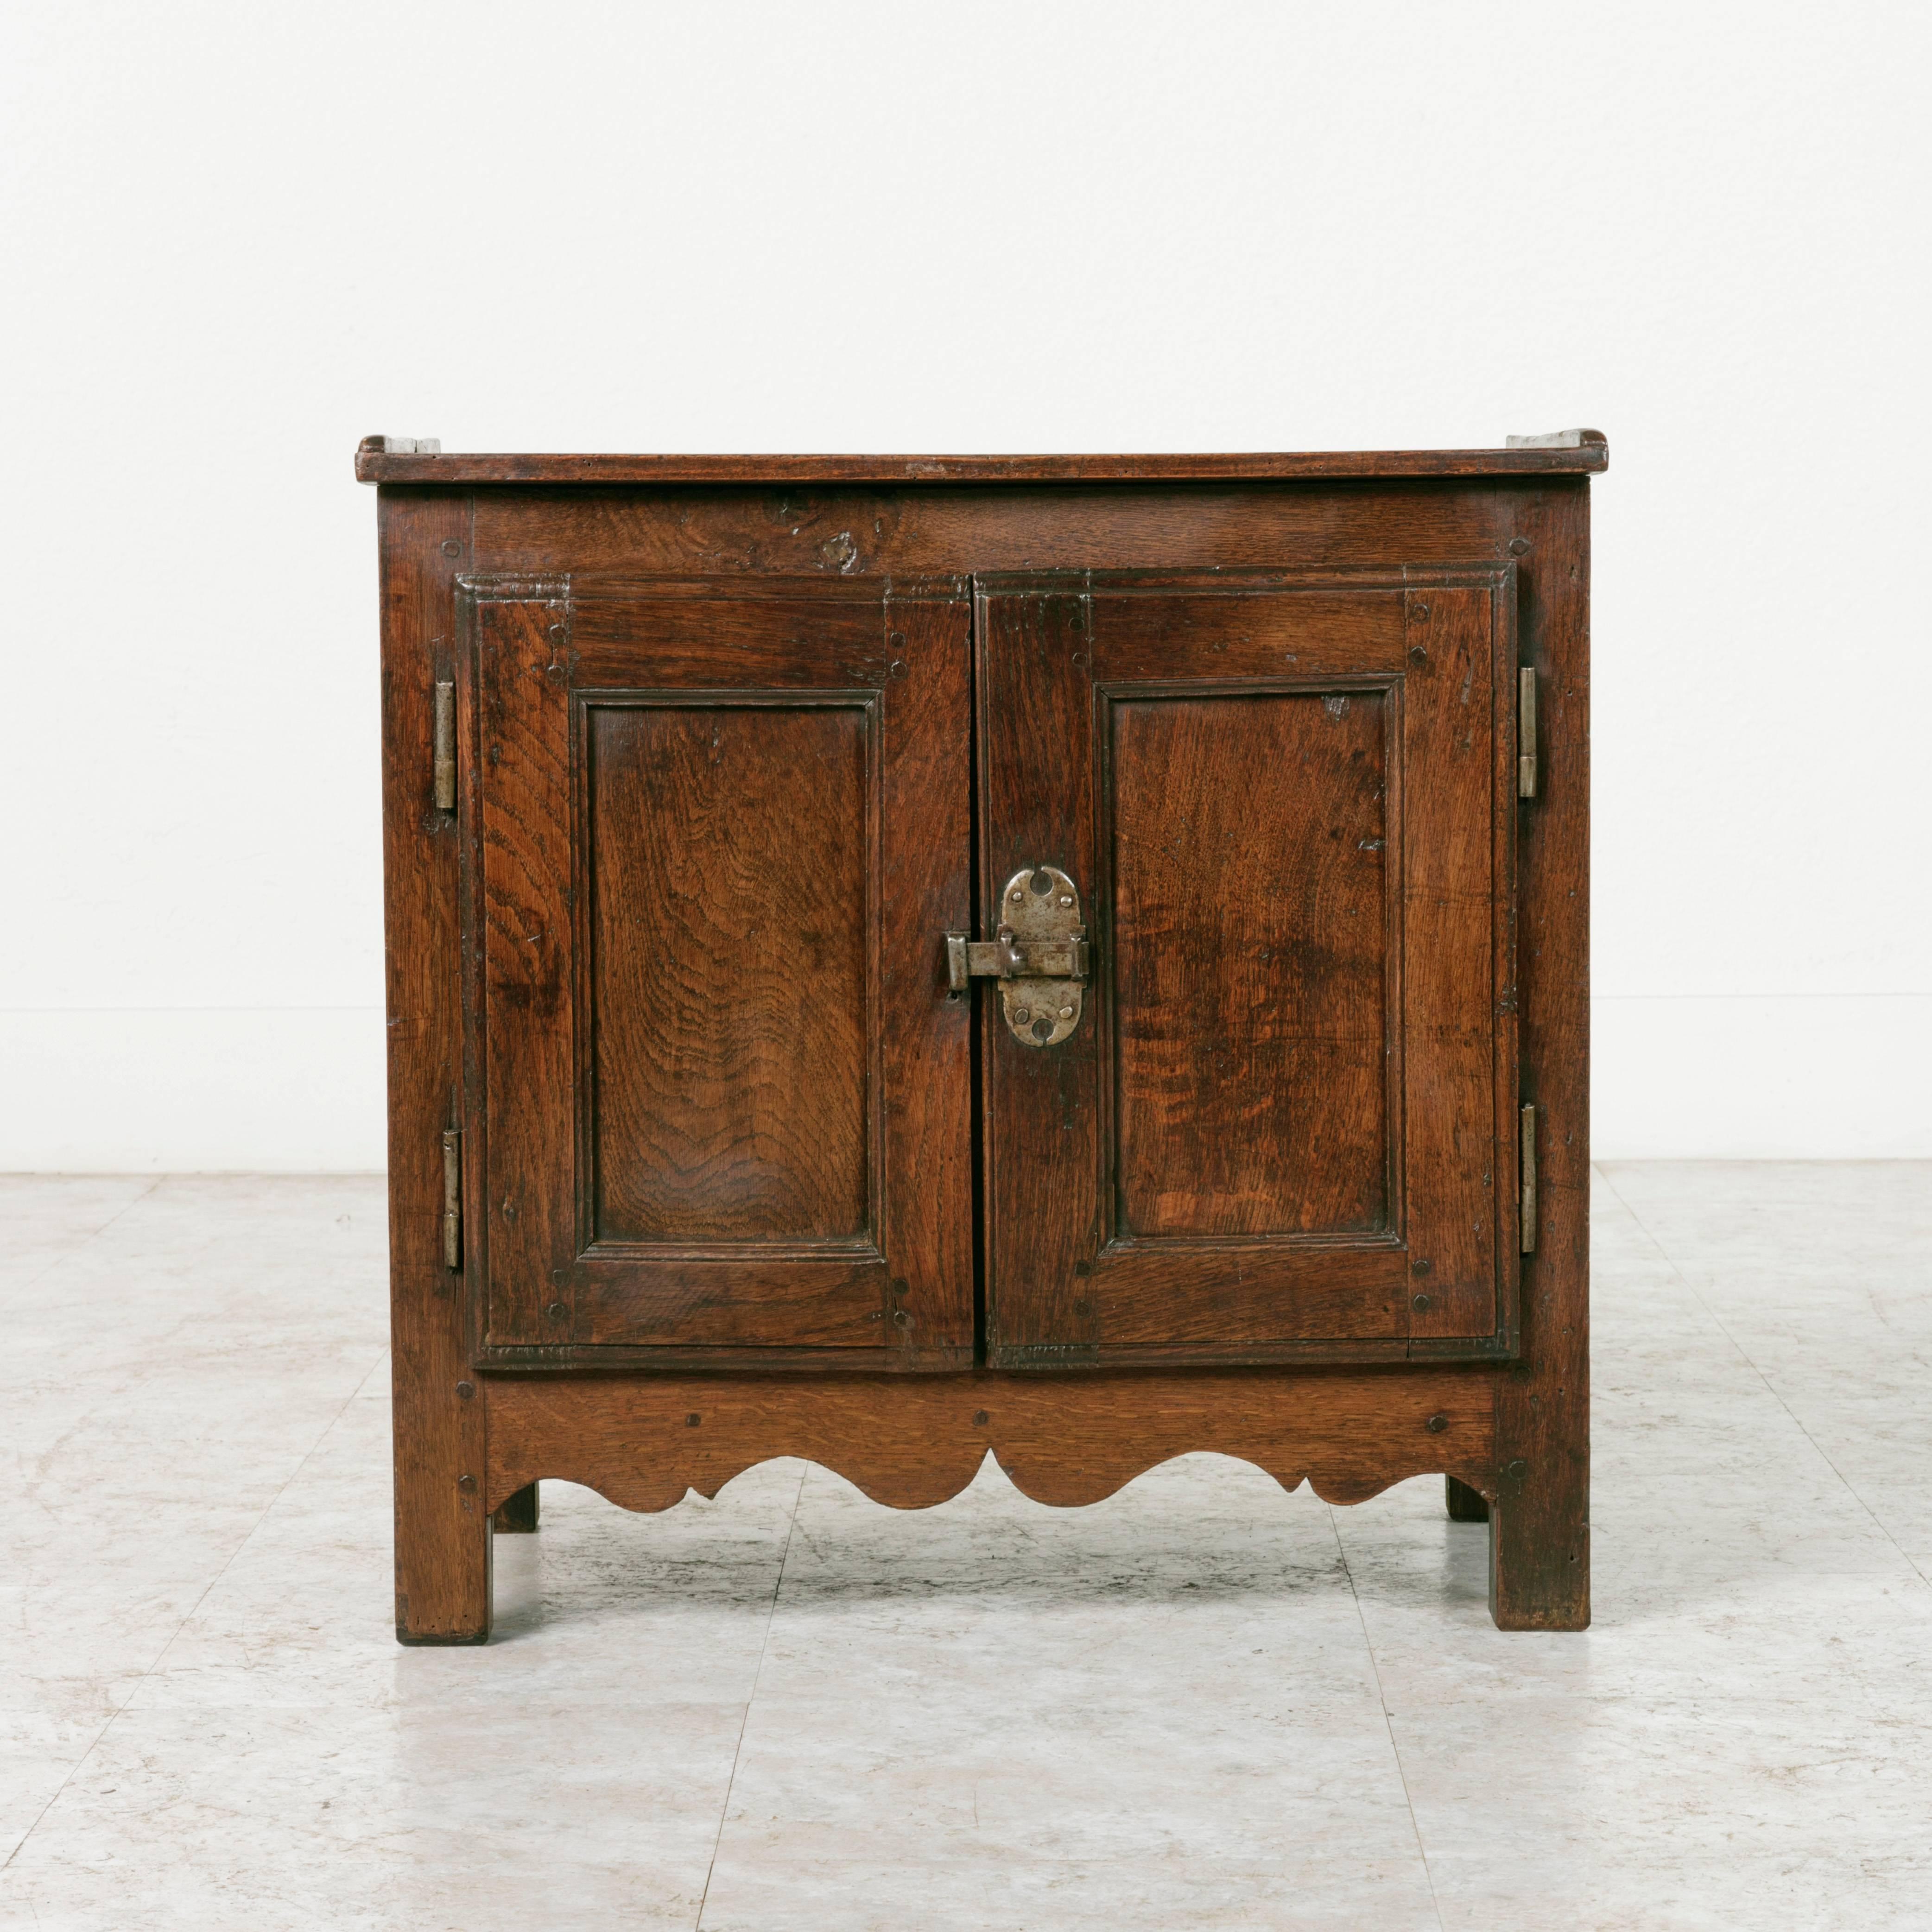 18th Century French Cabinet Side Table Solid Oak with Iron Latch from Normandy 1